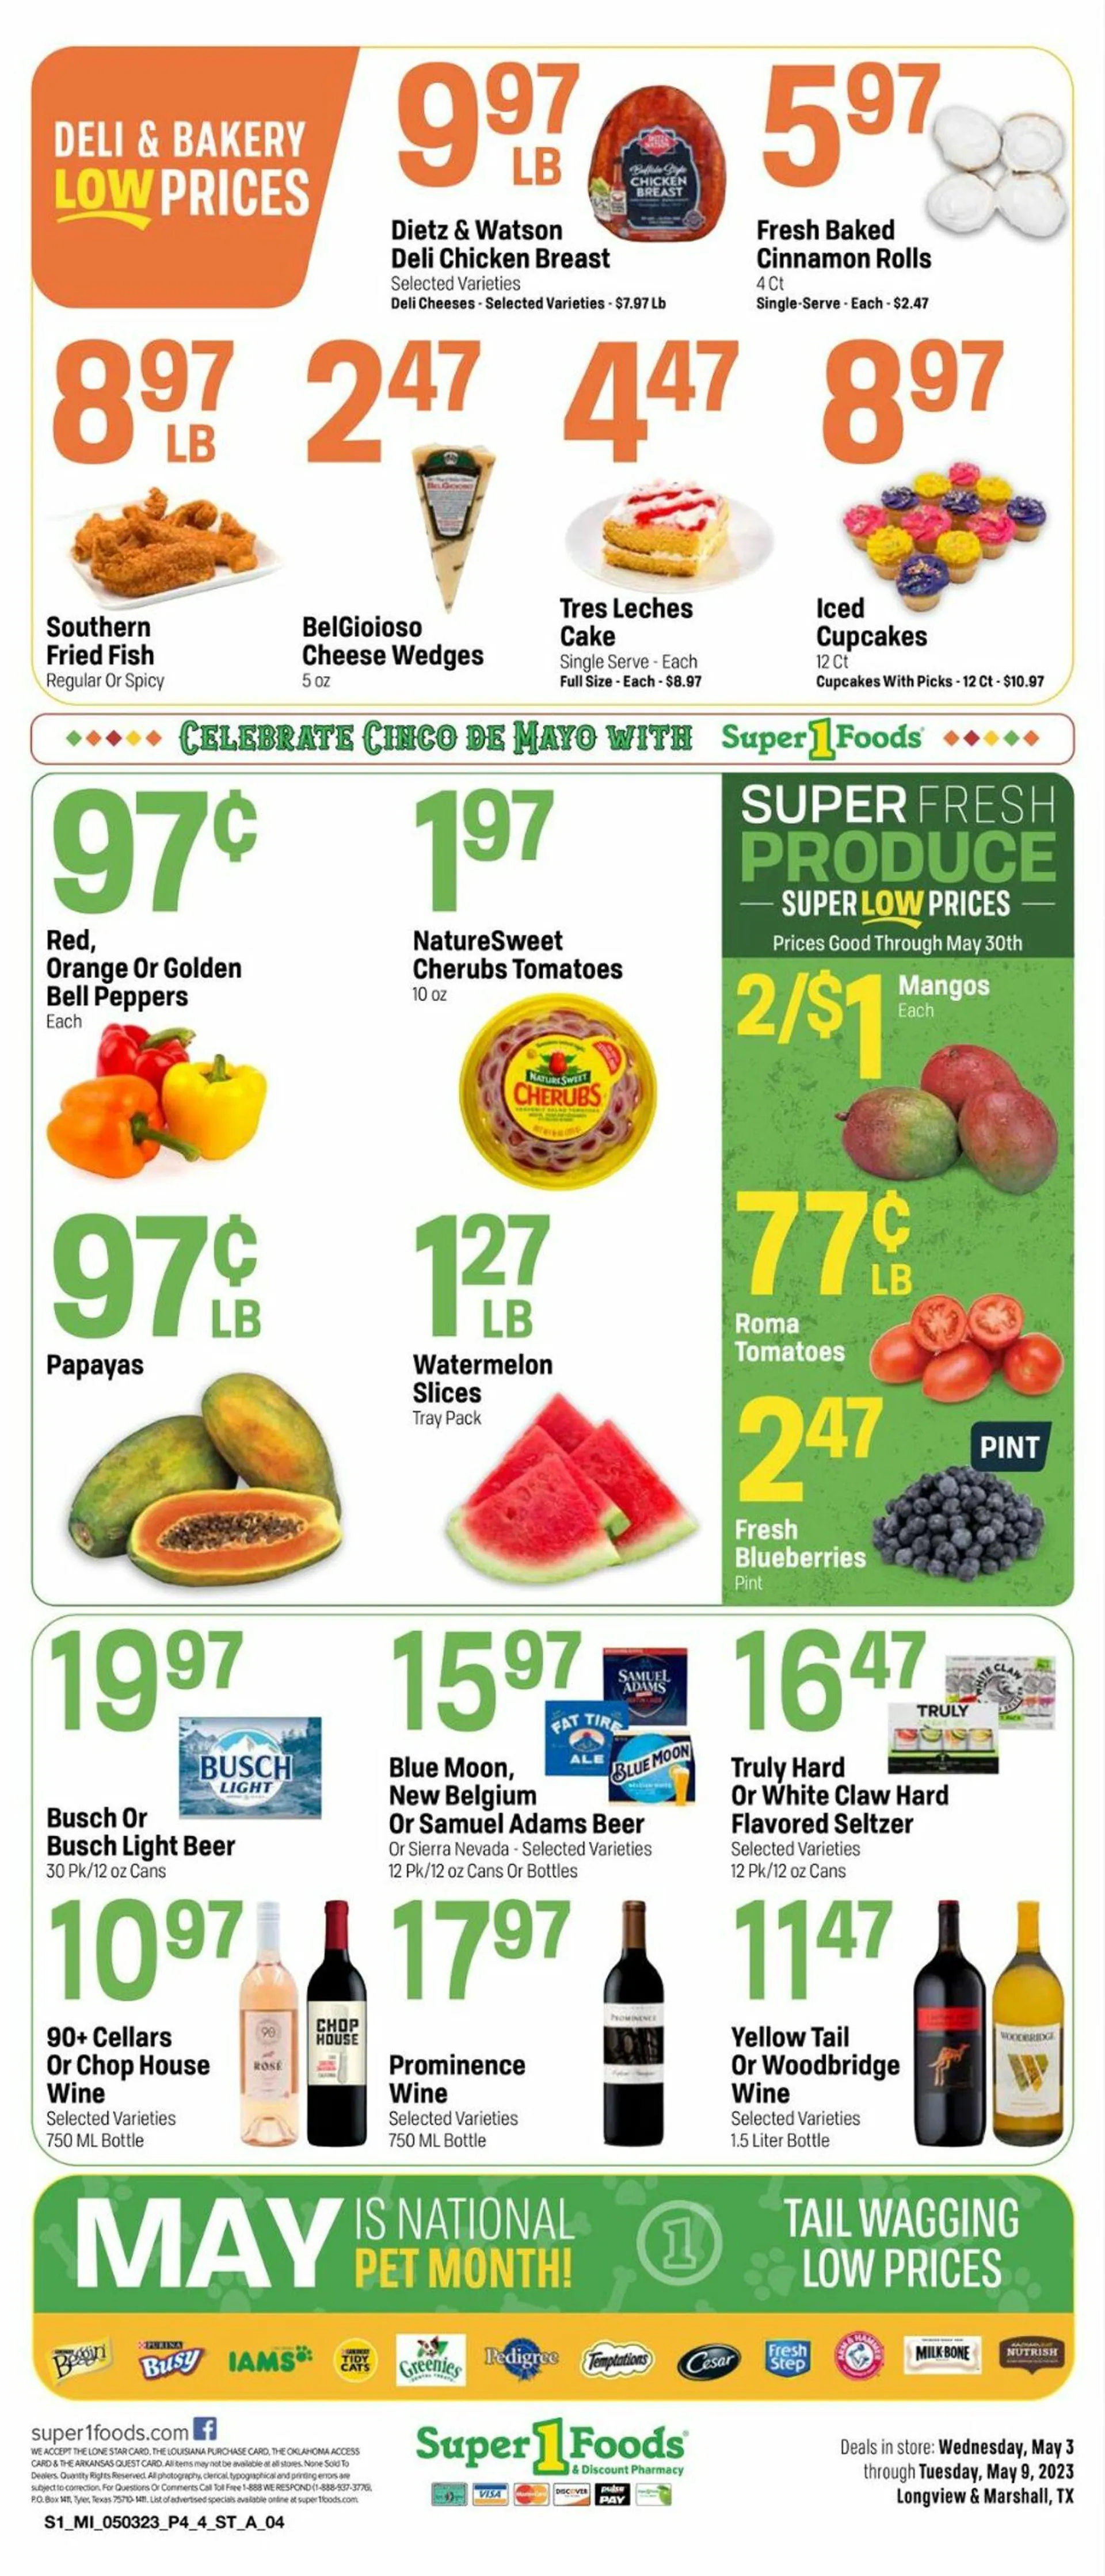 Super 1 Foods Current weekly ad - 4